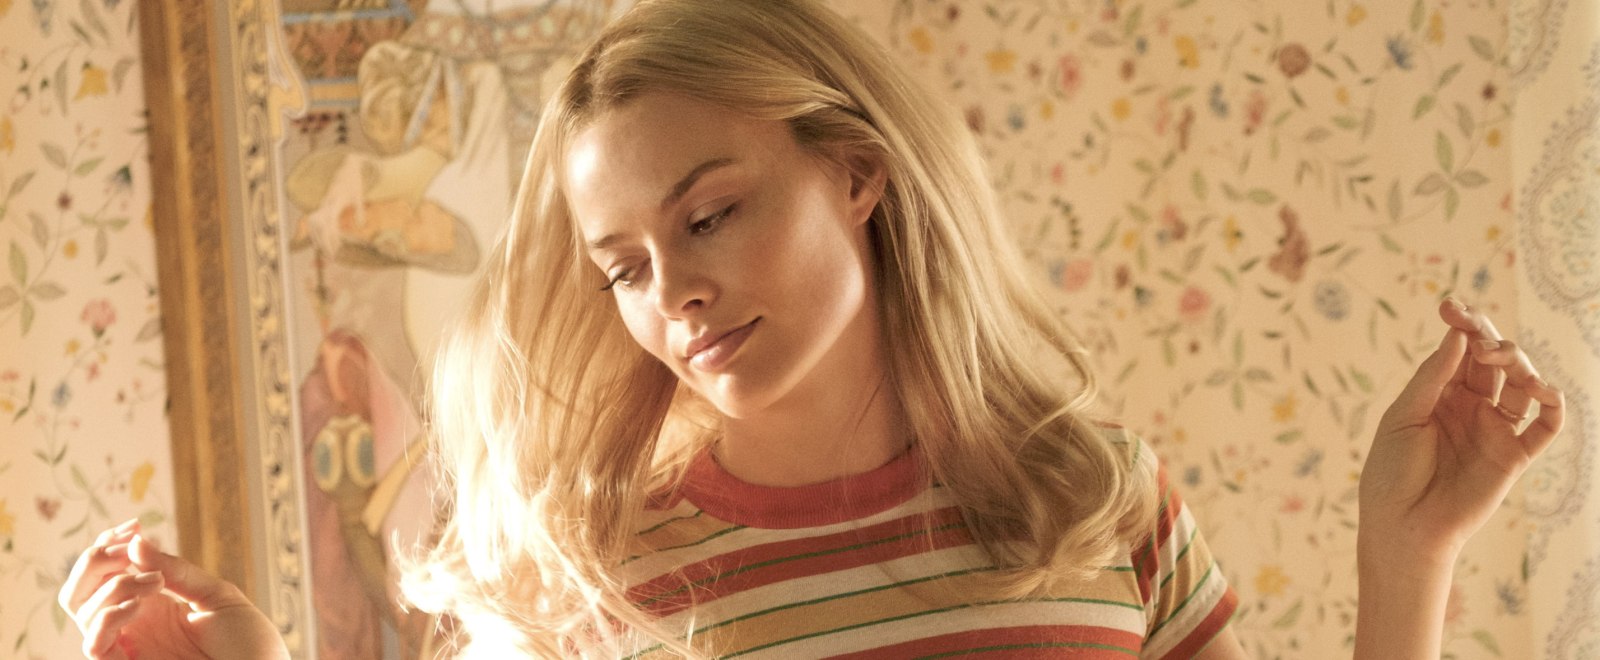 #ReleaseTheTarantinoCut: Margot Robbie Teased An Absurdly Long Cut Of ‘Once Upon A Time In Hollywood’